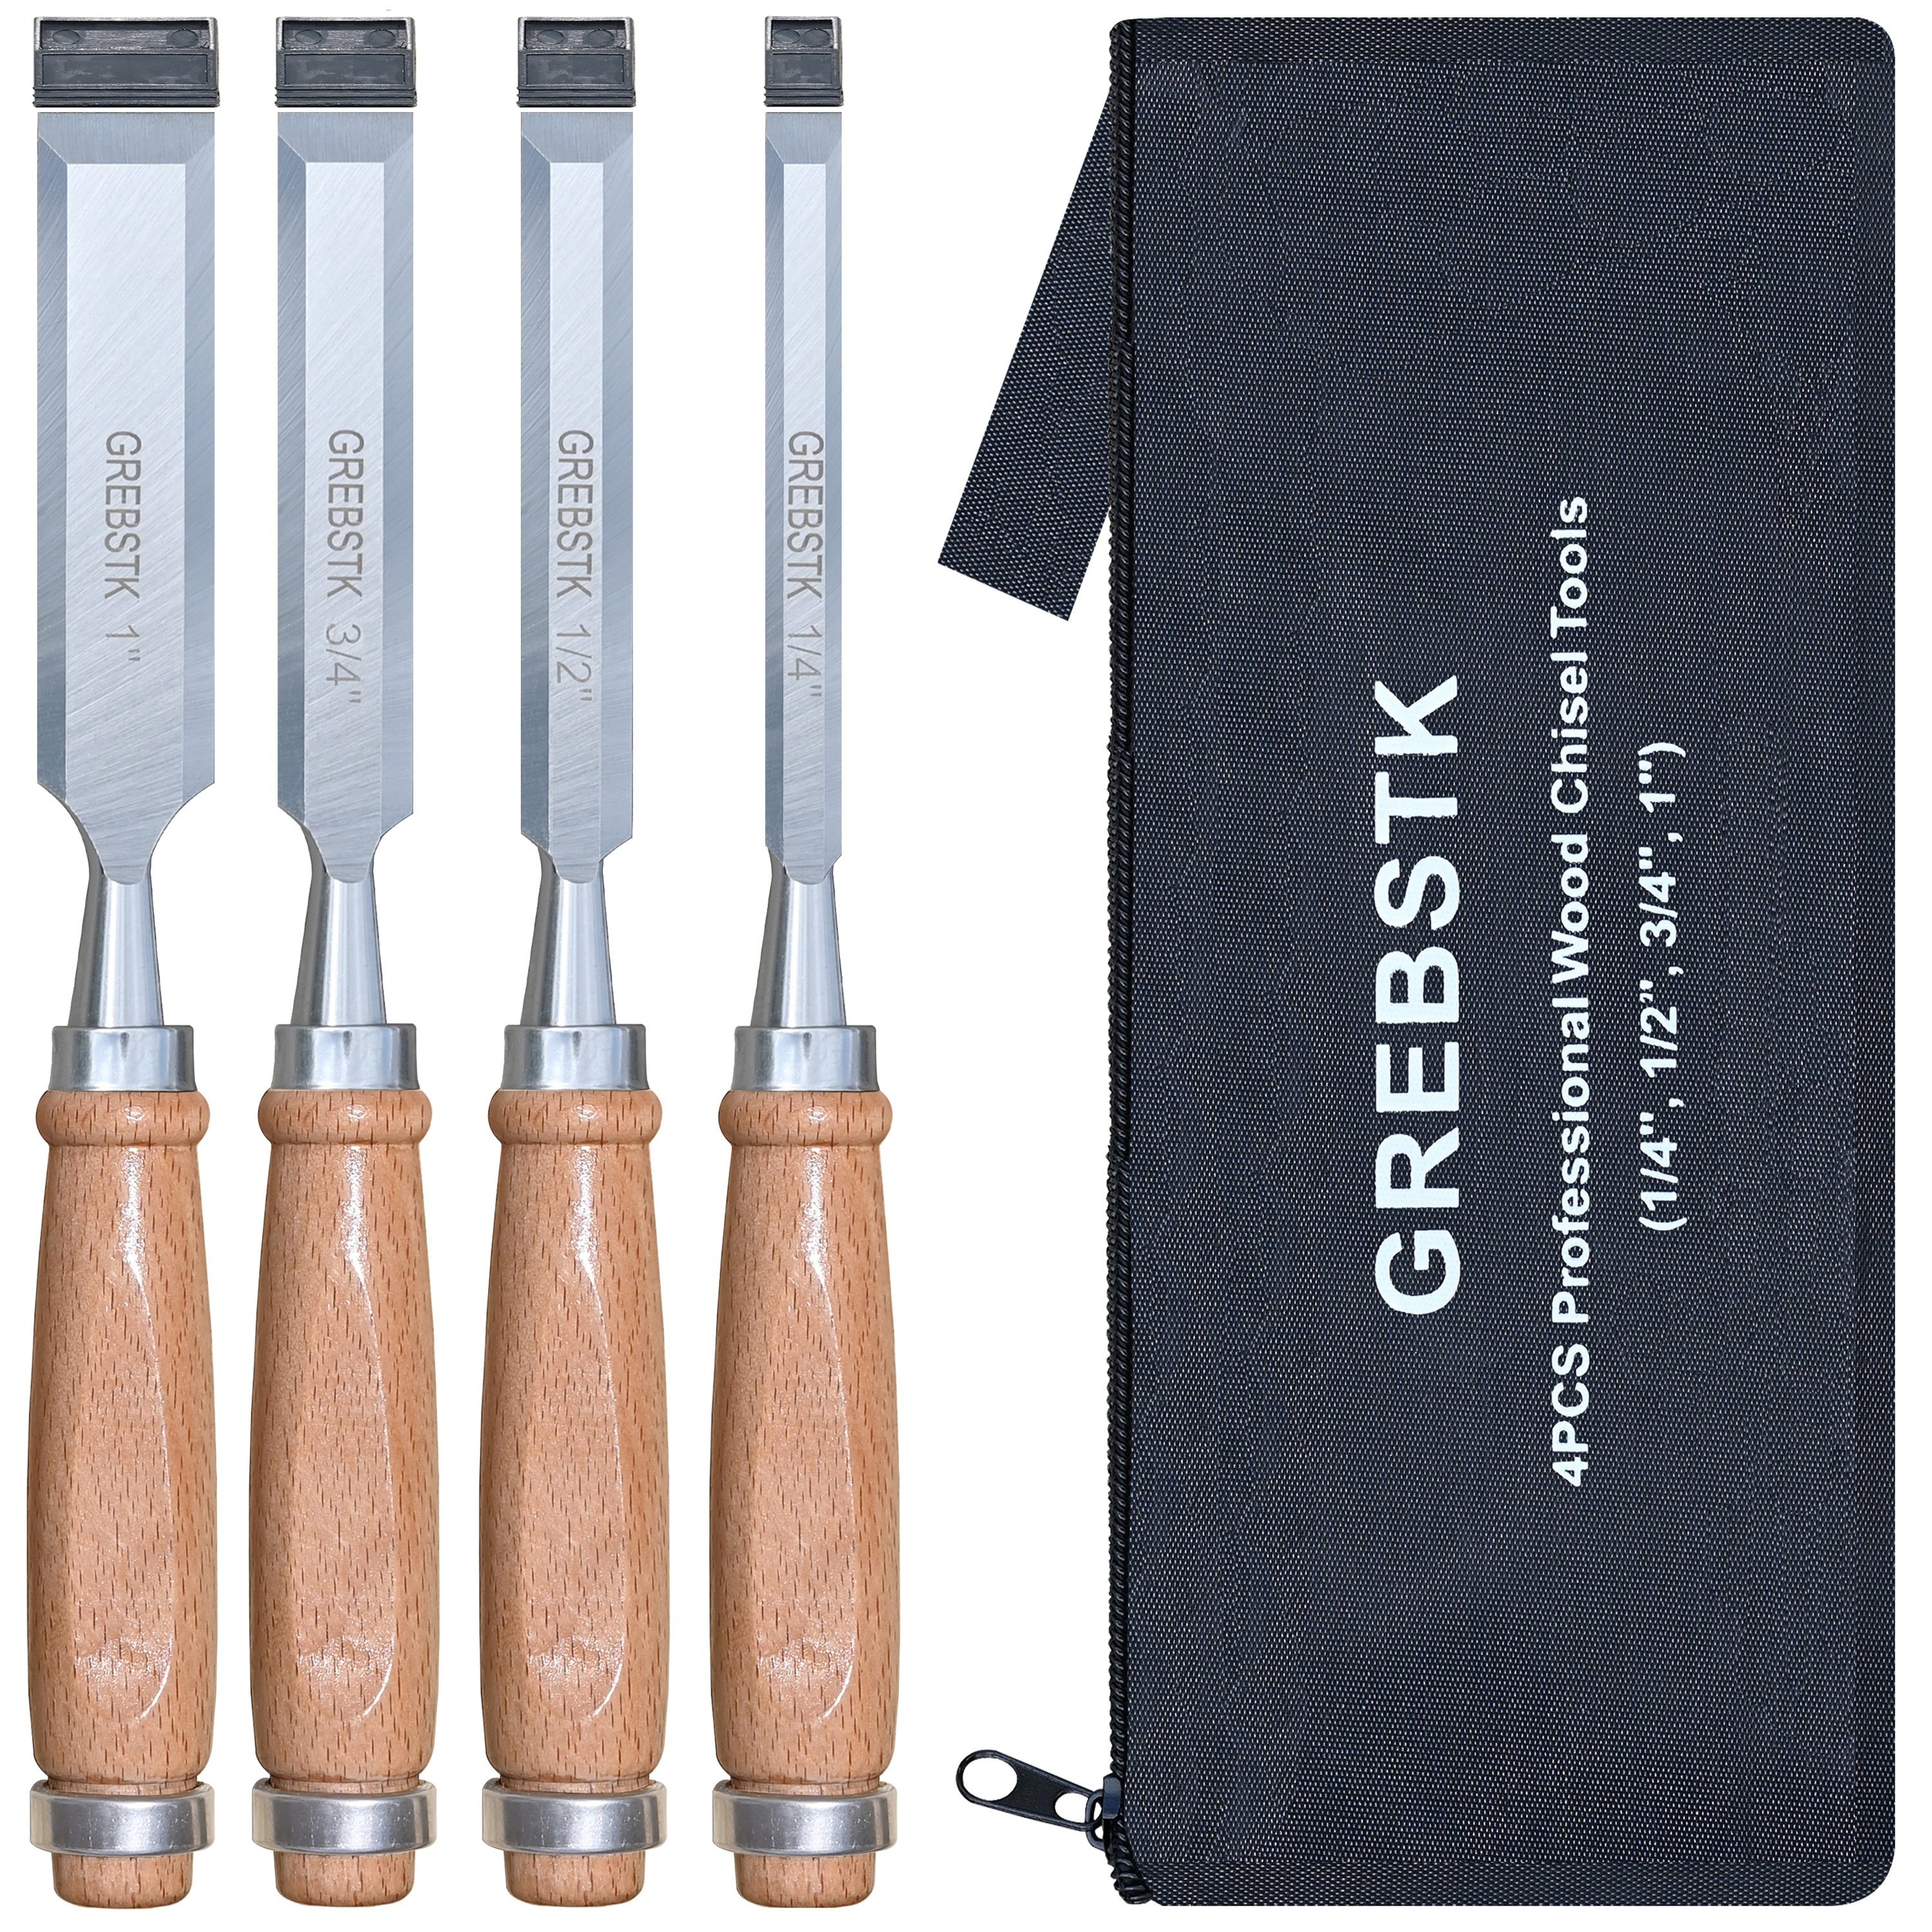 8 Piece Wood Chisel Woodworking Lathe Hand Tool Set - Includes Gouges,  Skews, Round Nose, Spearpoint, and Parting Chisels 